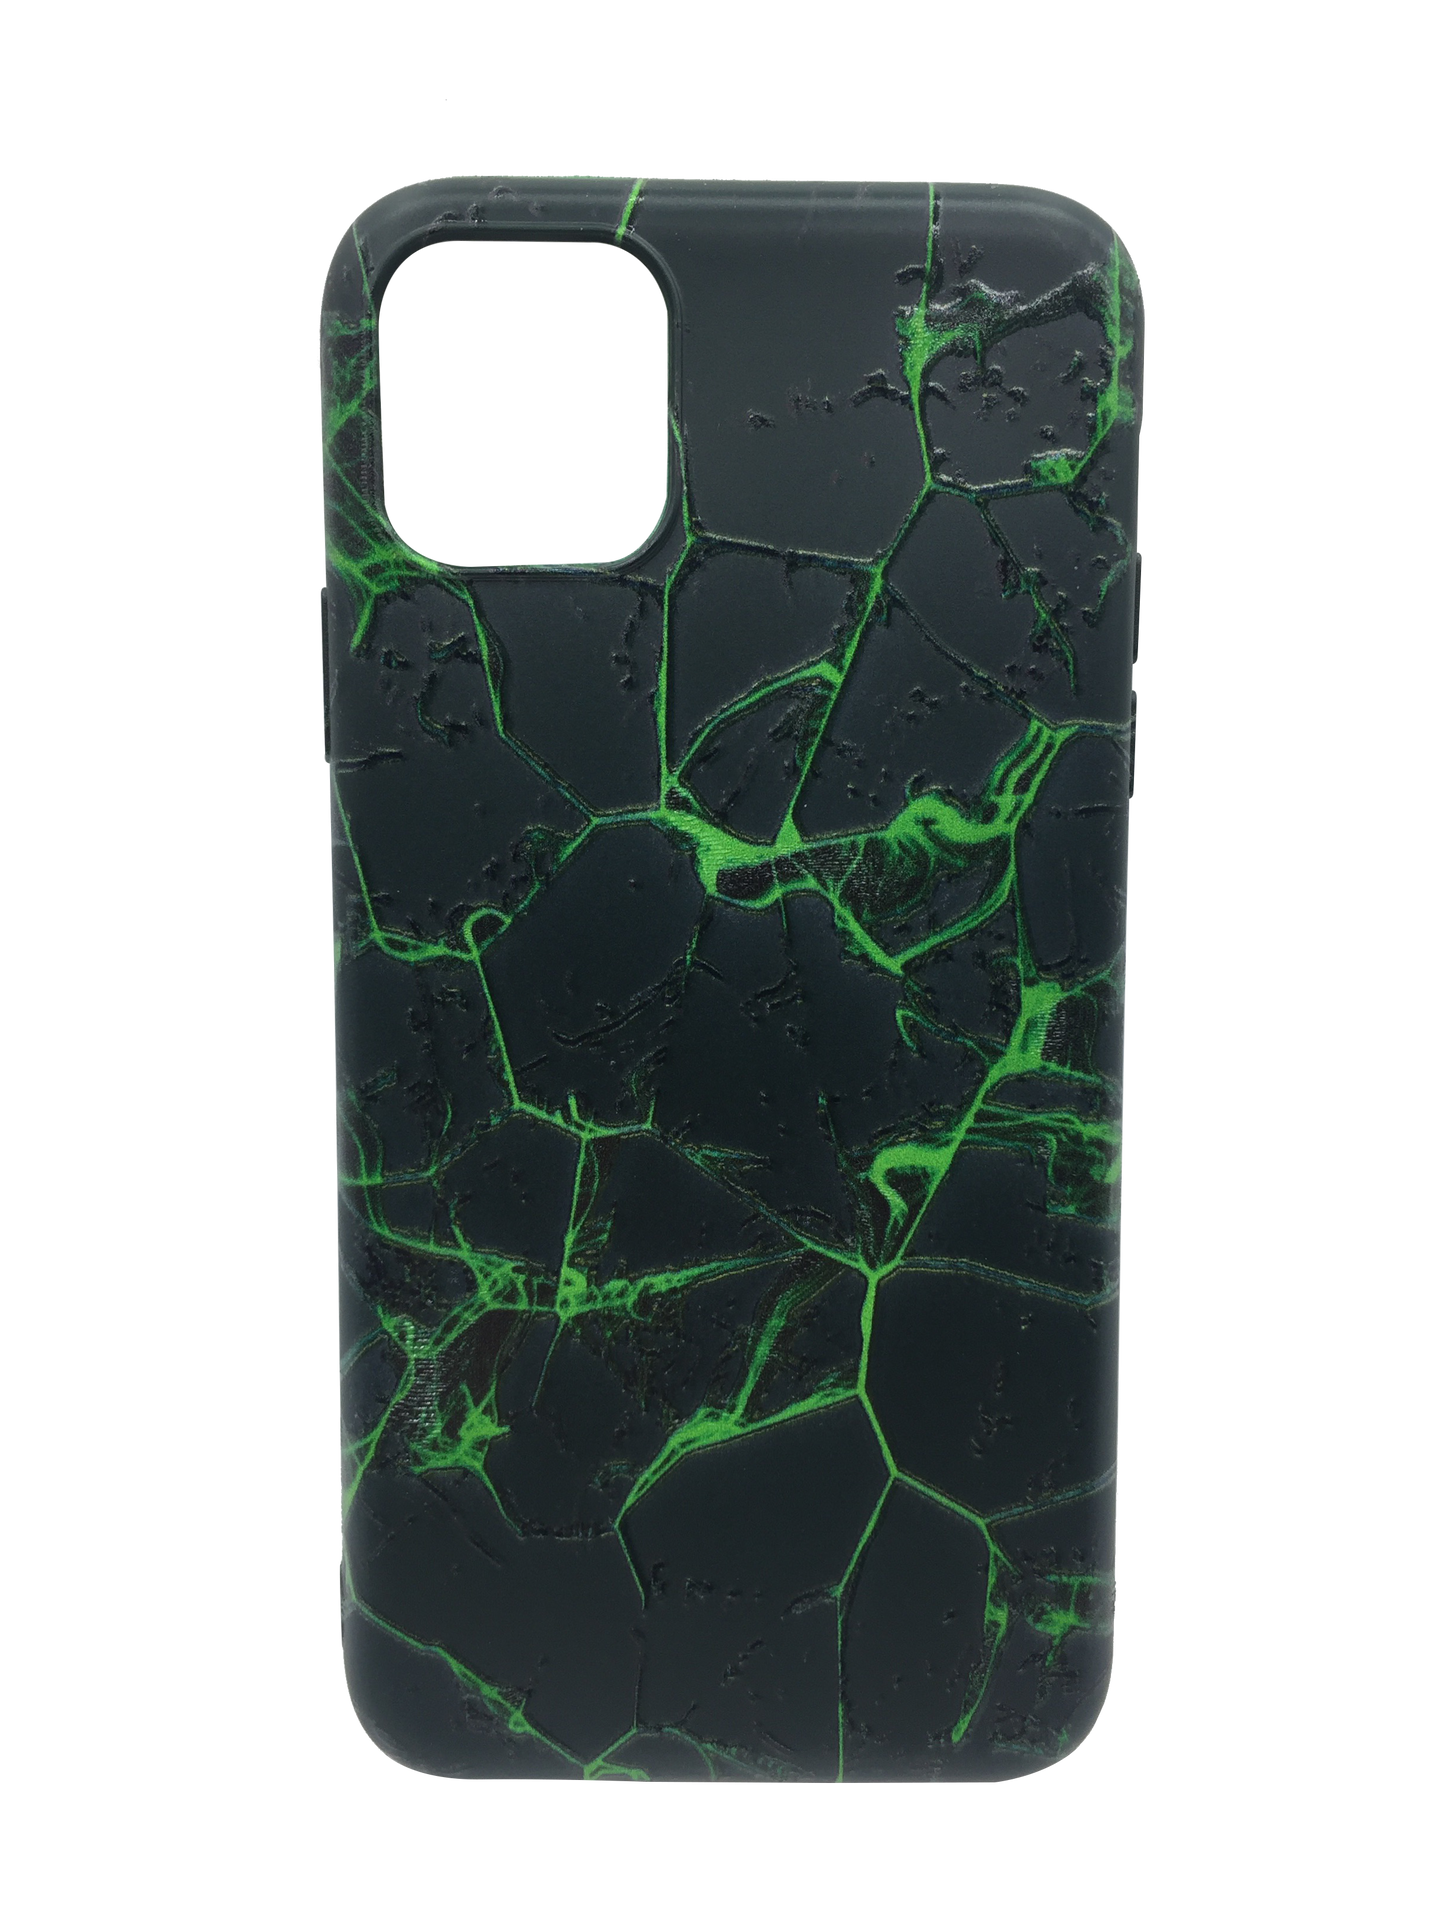 Silicone case iPHONE 11 GREEN